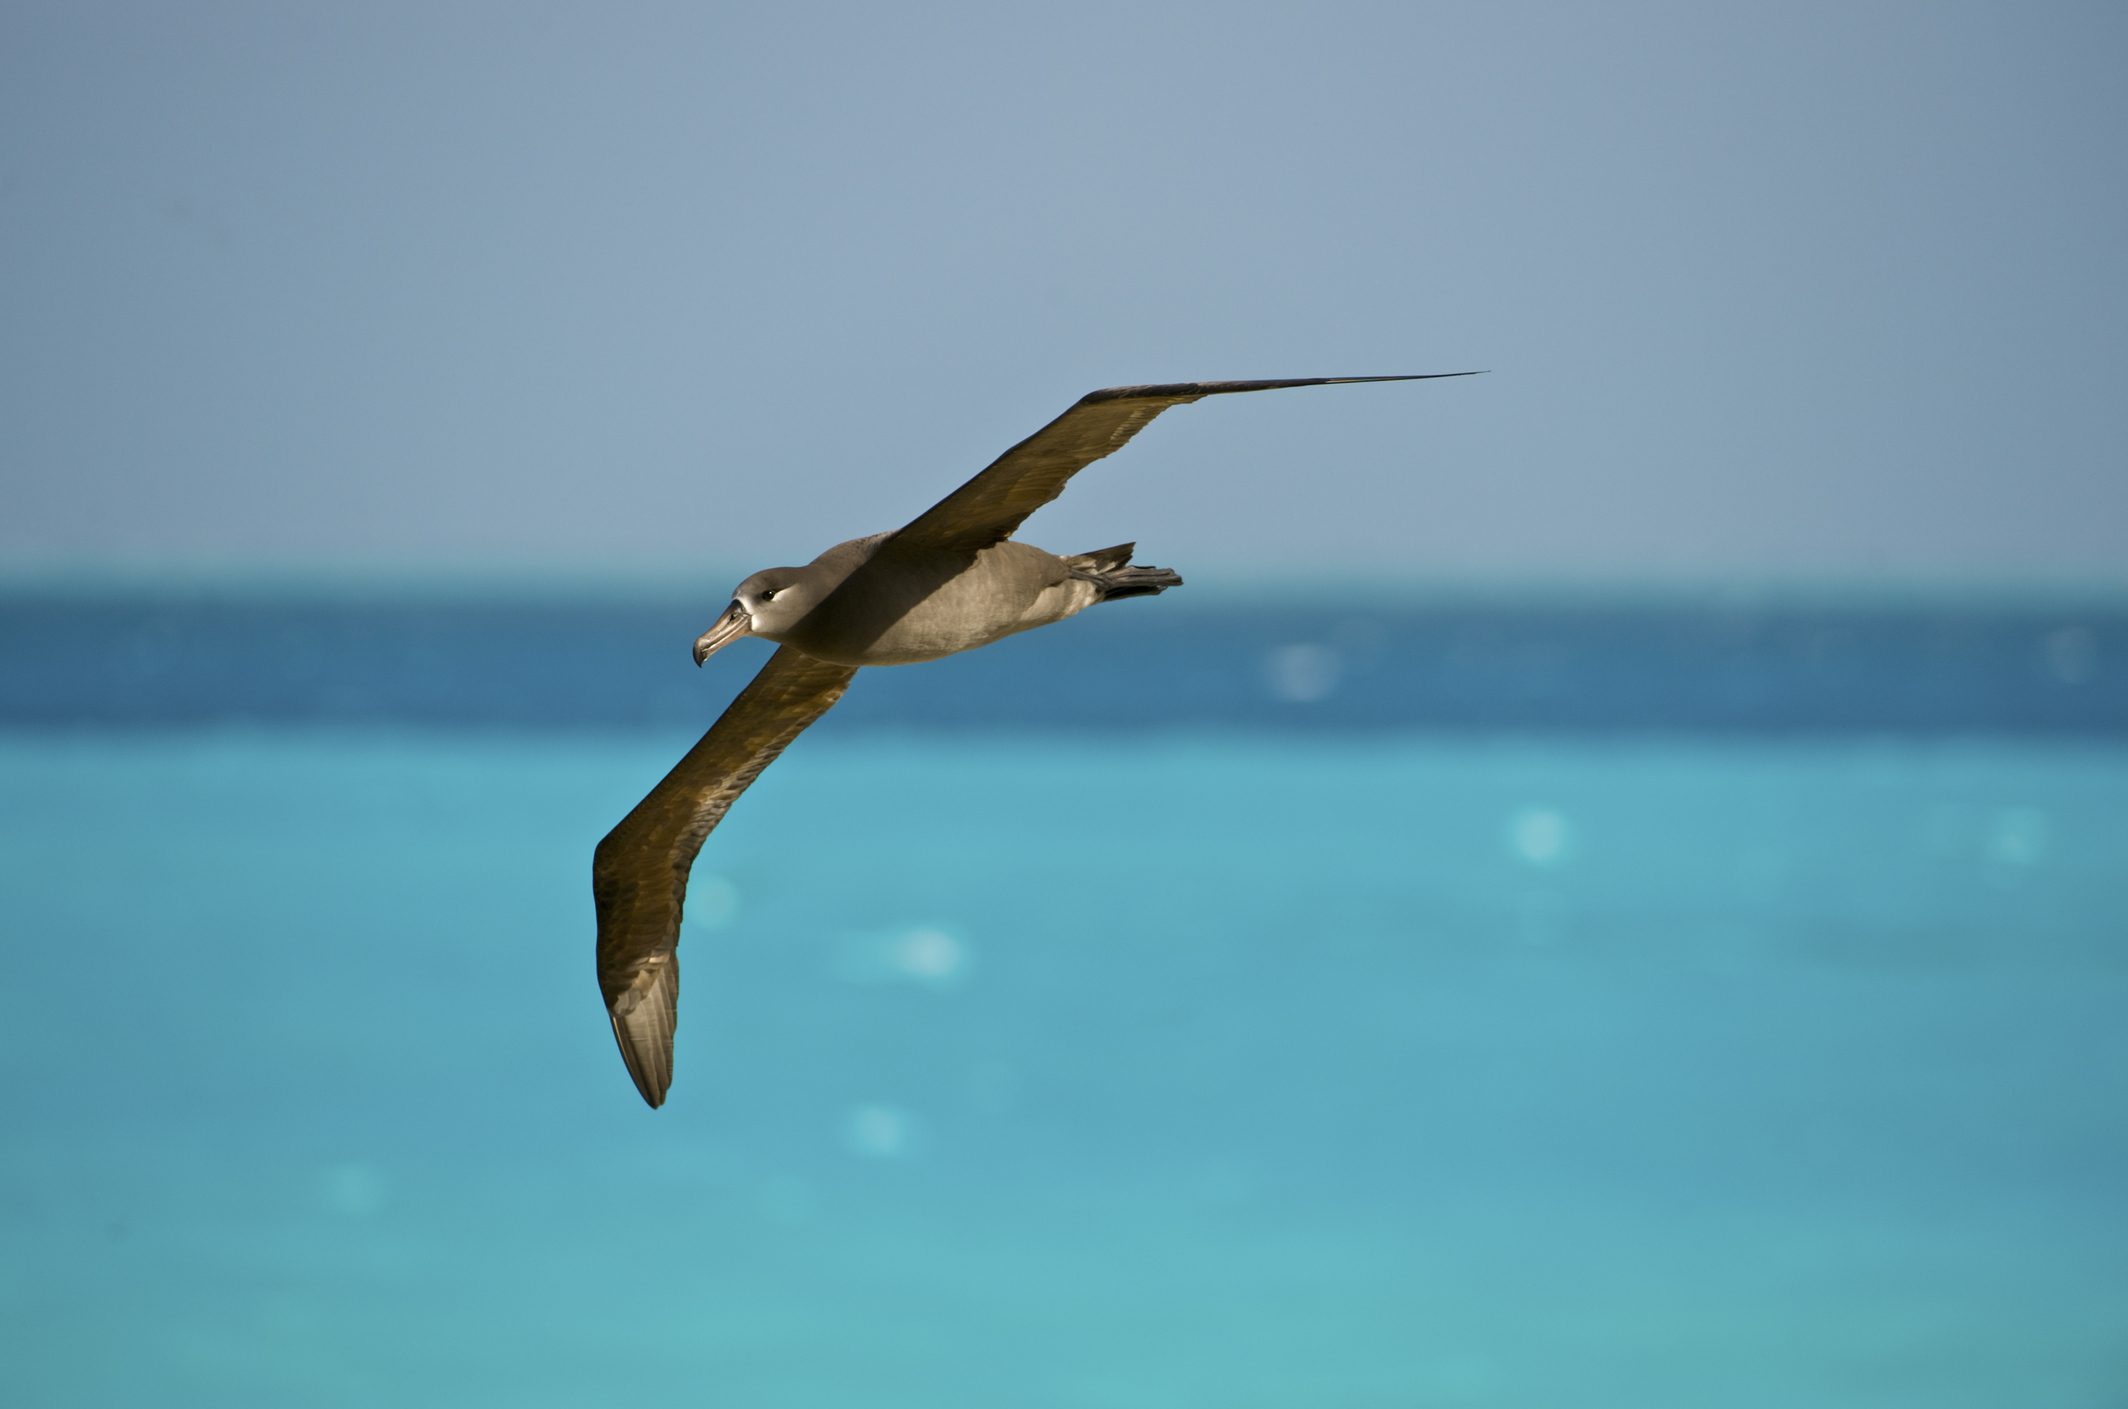 Meet the Seabirds That Soar Over the Waves